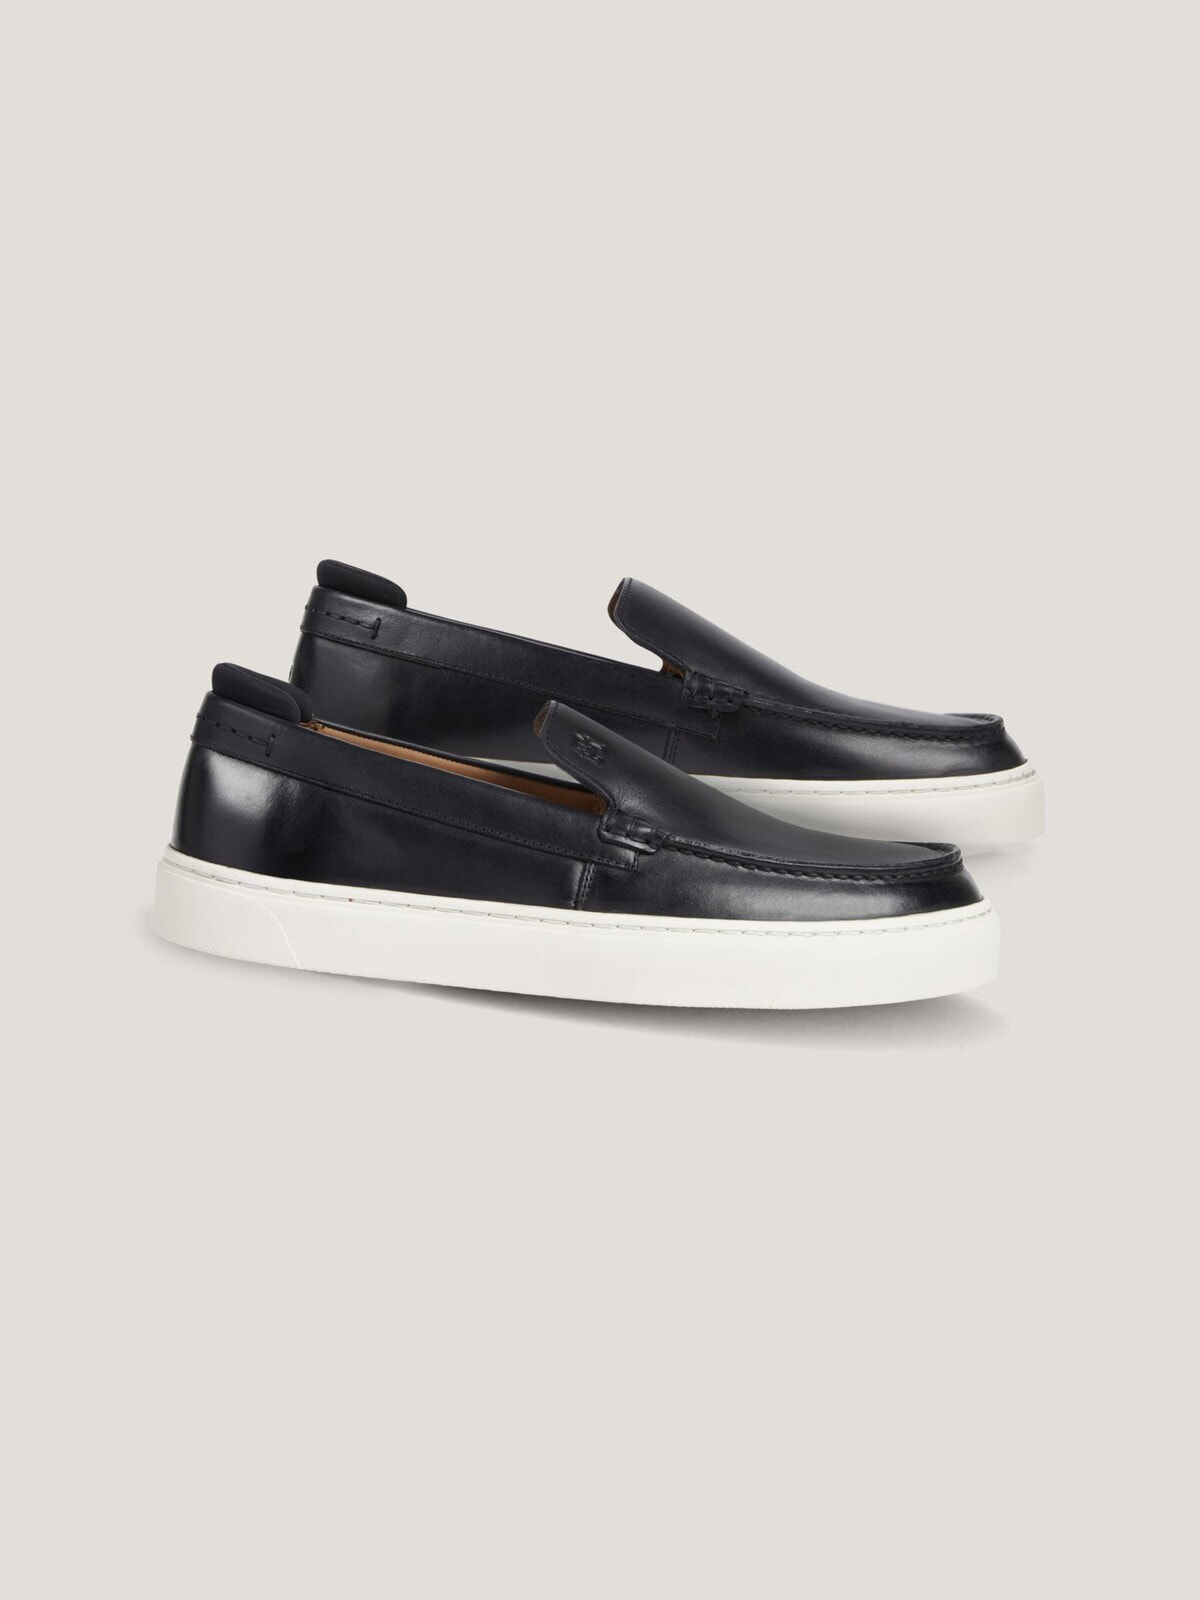 TH Logo Leather Loafer Sneaker